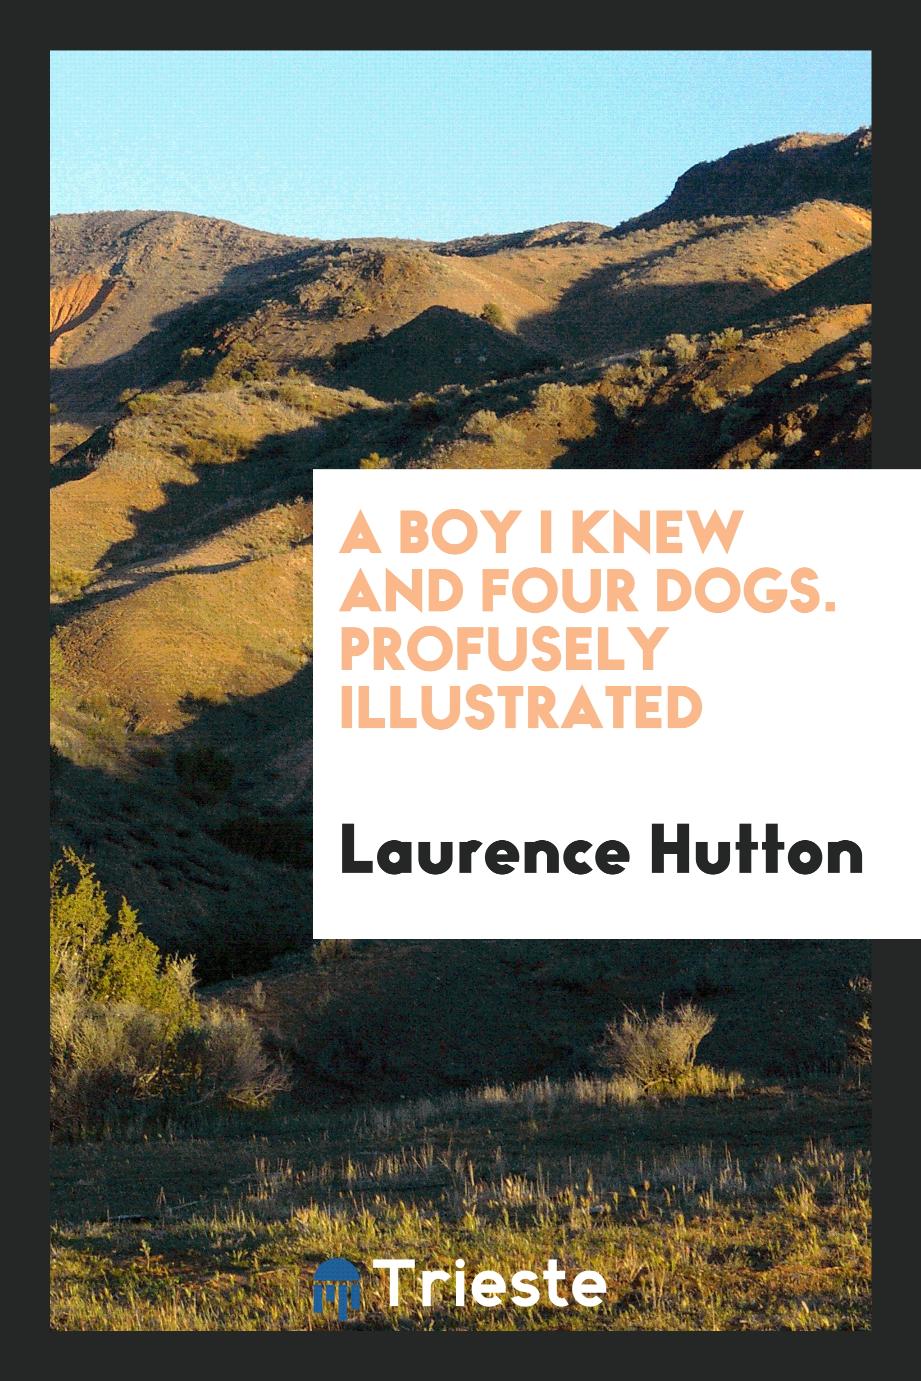 A Boy I Knew and Four Dogs. Profusely Illustrated